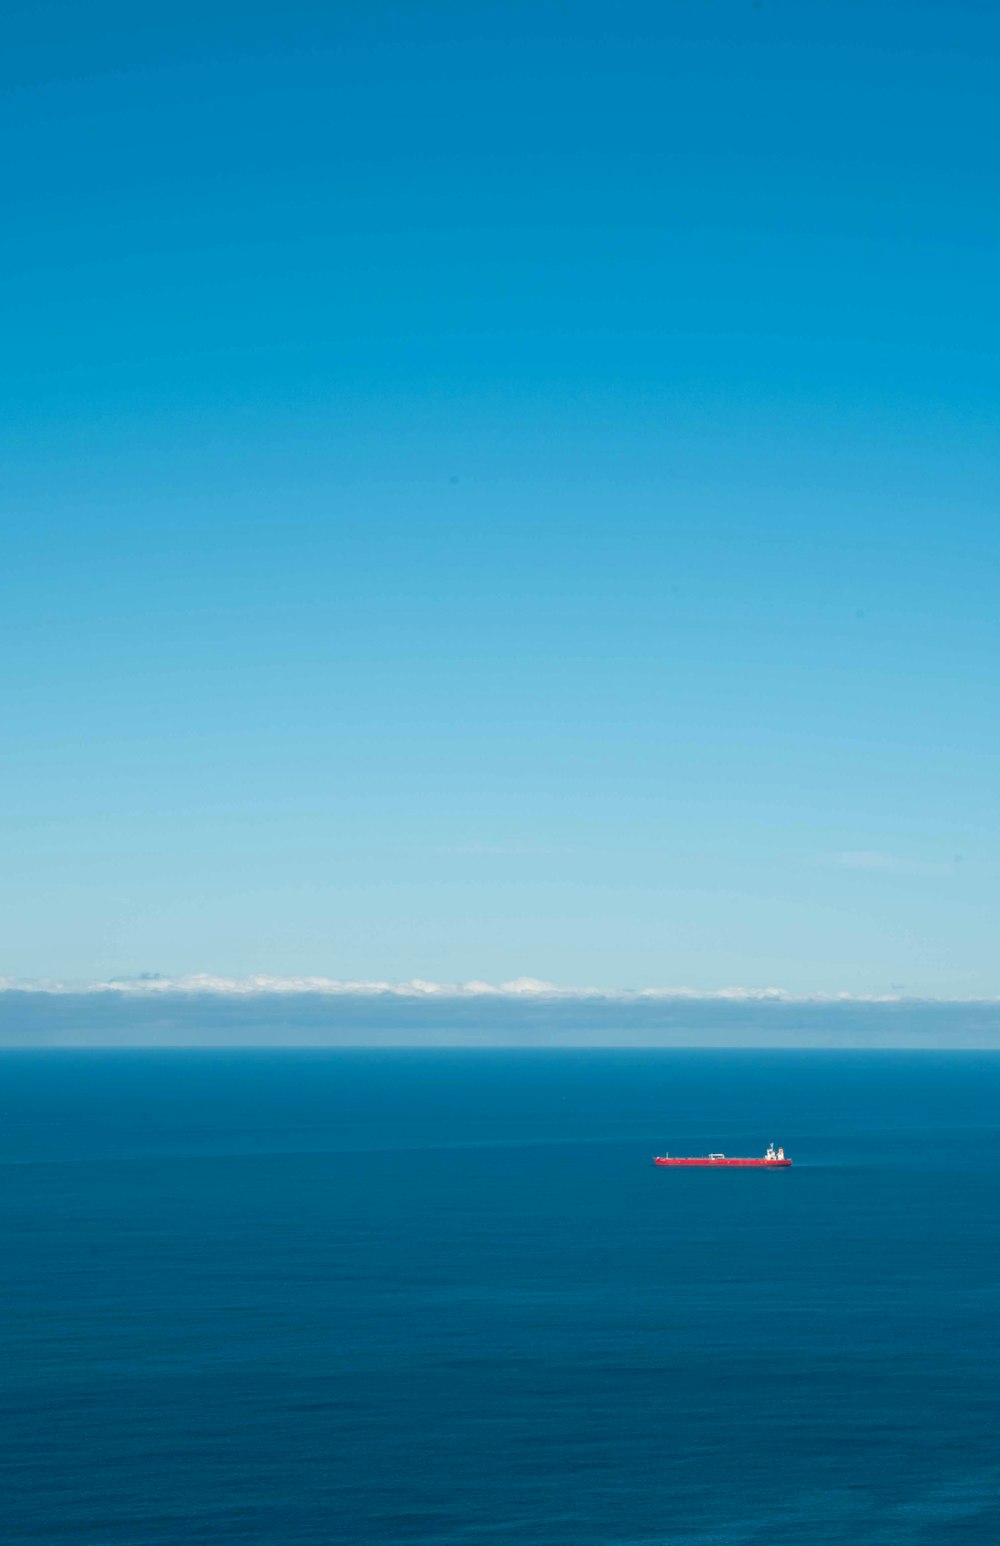 red boat on sea under blue sky during daytime